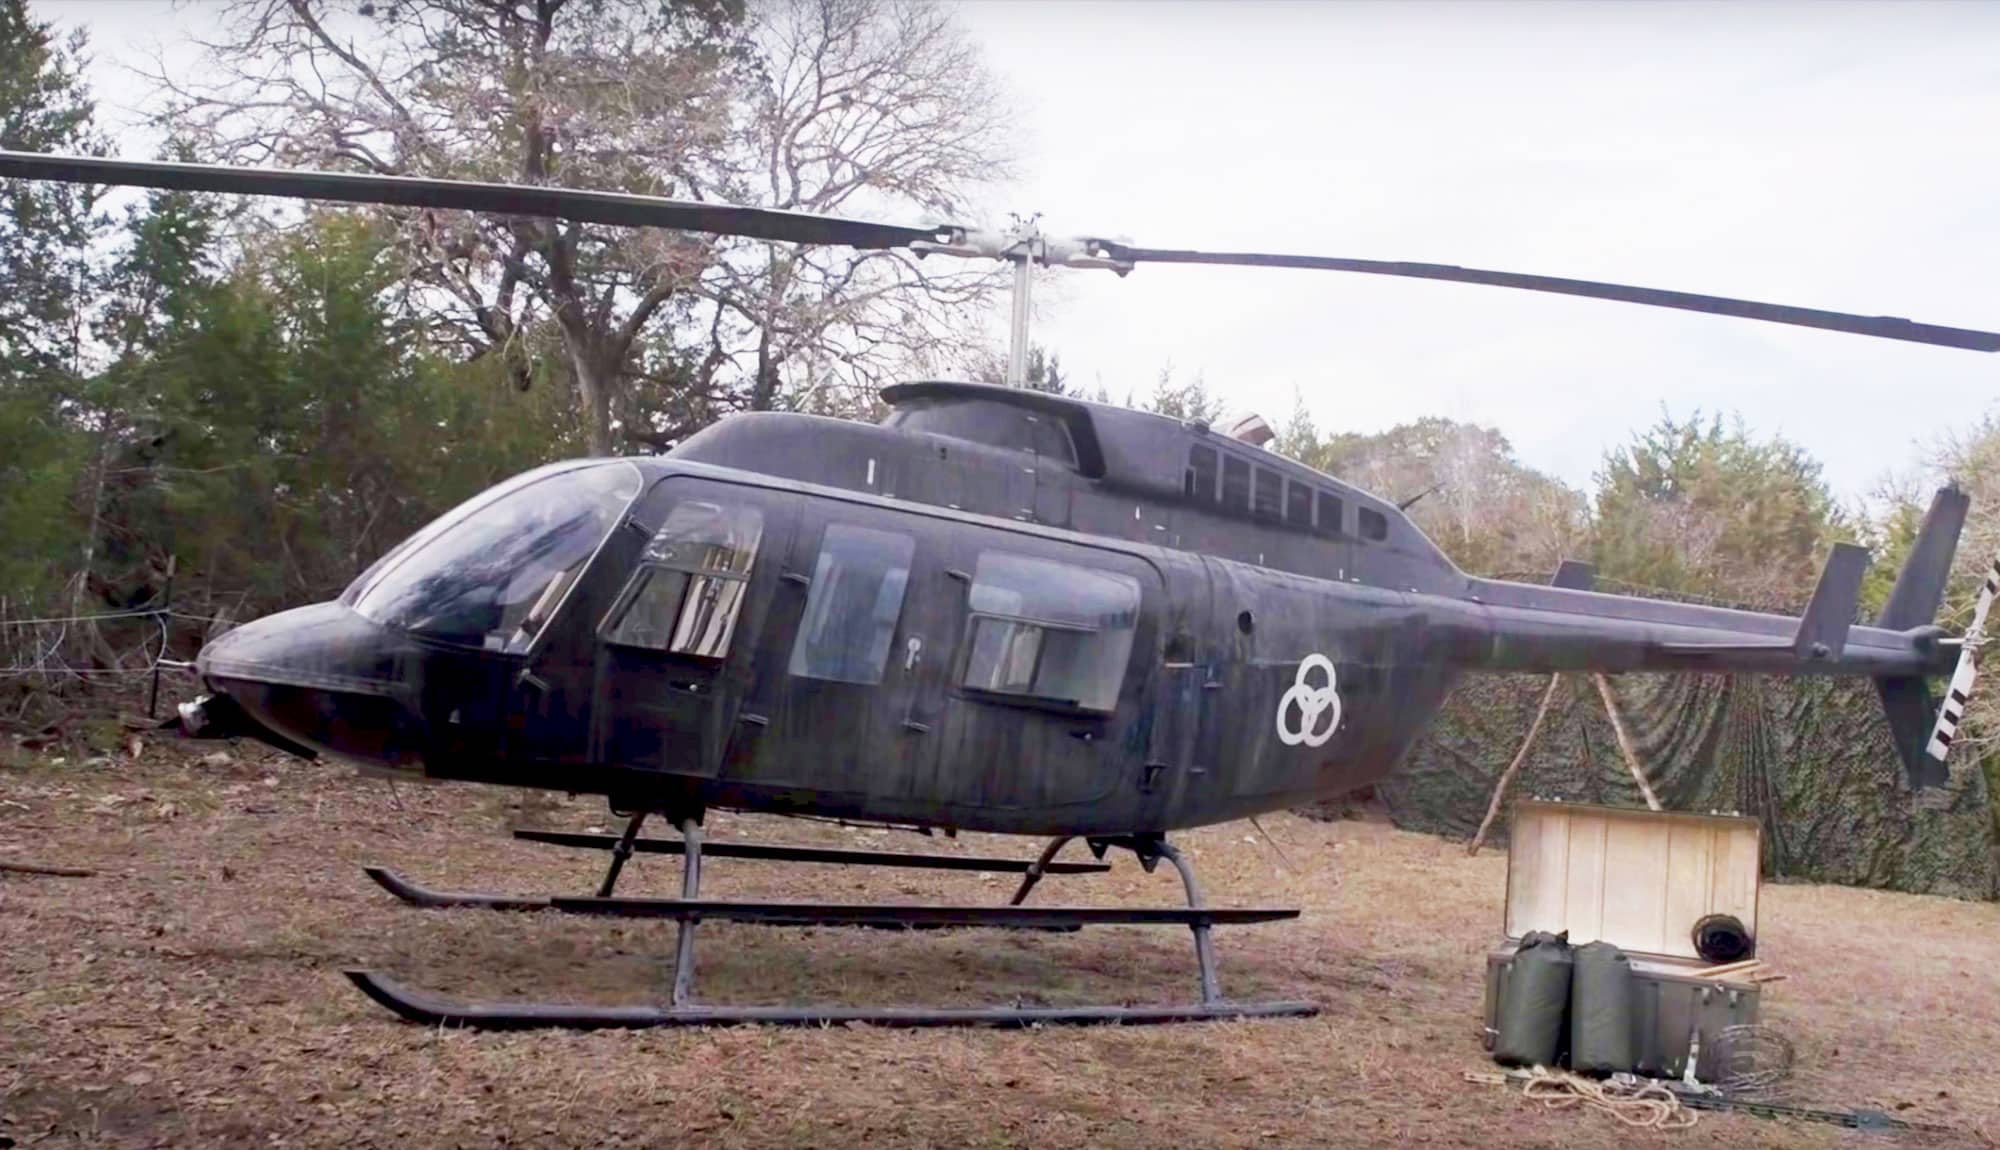 Althea Finds A Familiar Helicopter In Scene From Fear the Walking Dead